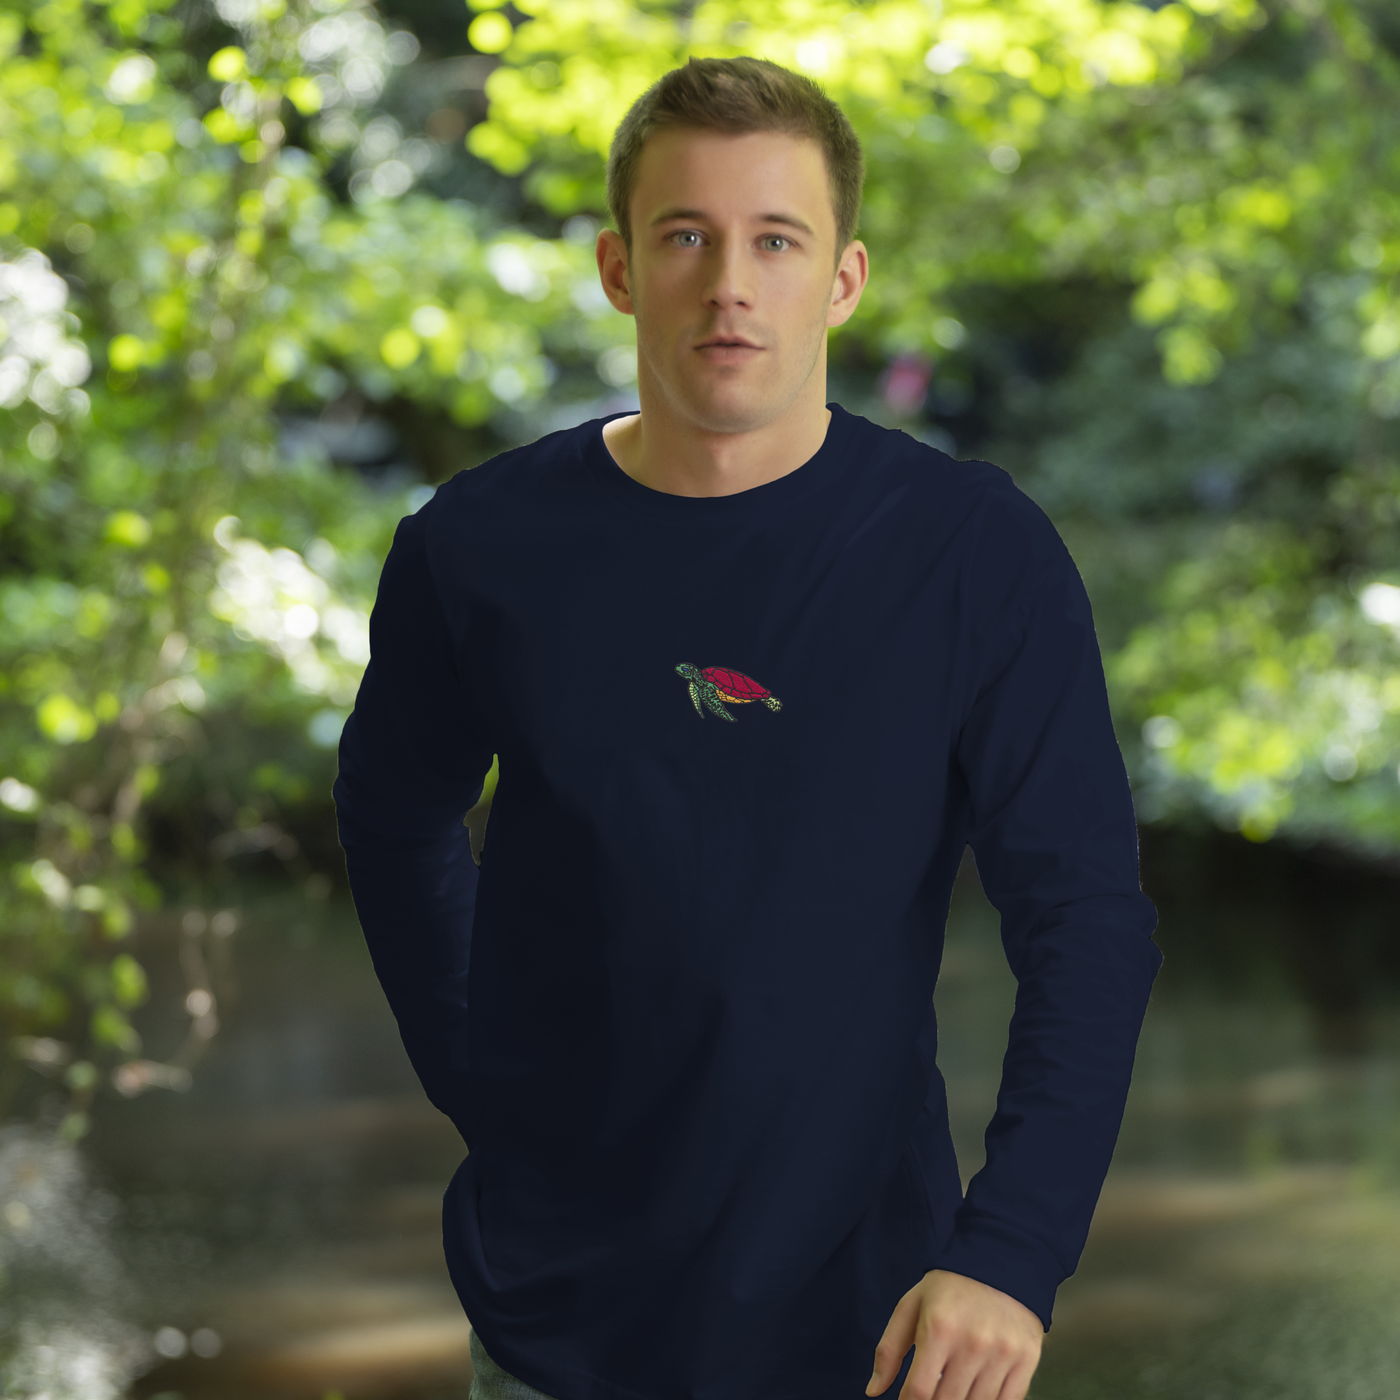 Bobby's Planet Men's Embroidered Sea Turtle Long Sleeve Shirt from Seven Seas Fish Animals Collection in Navy Color#color_navy